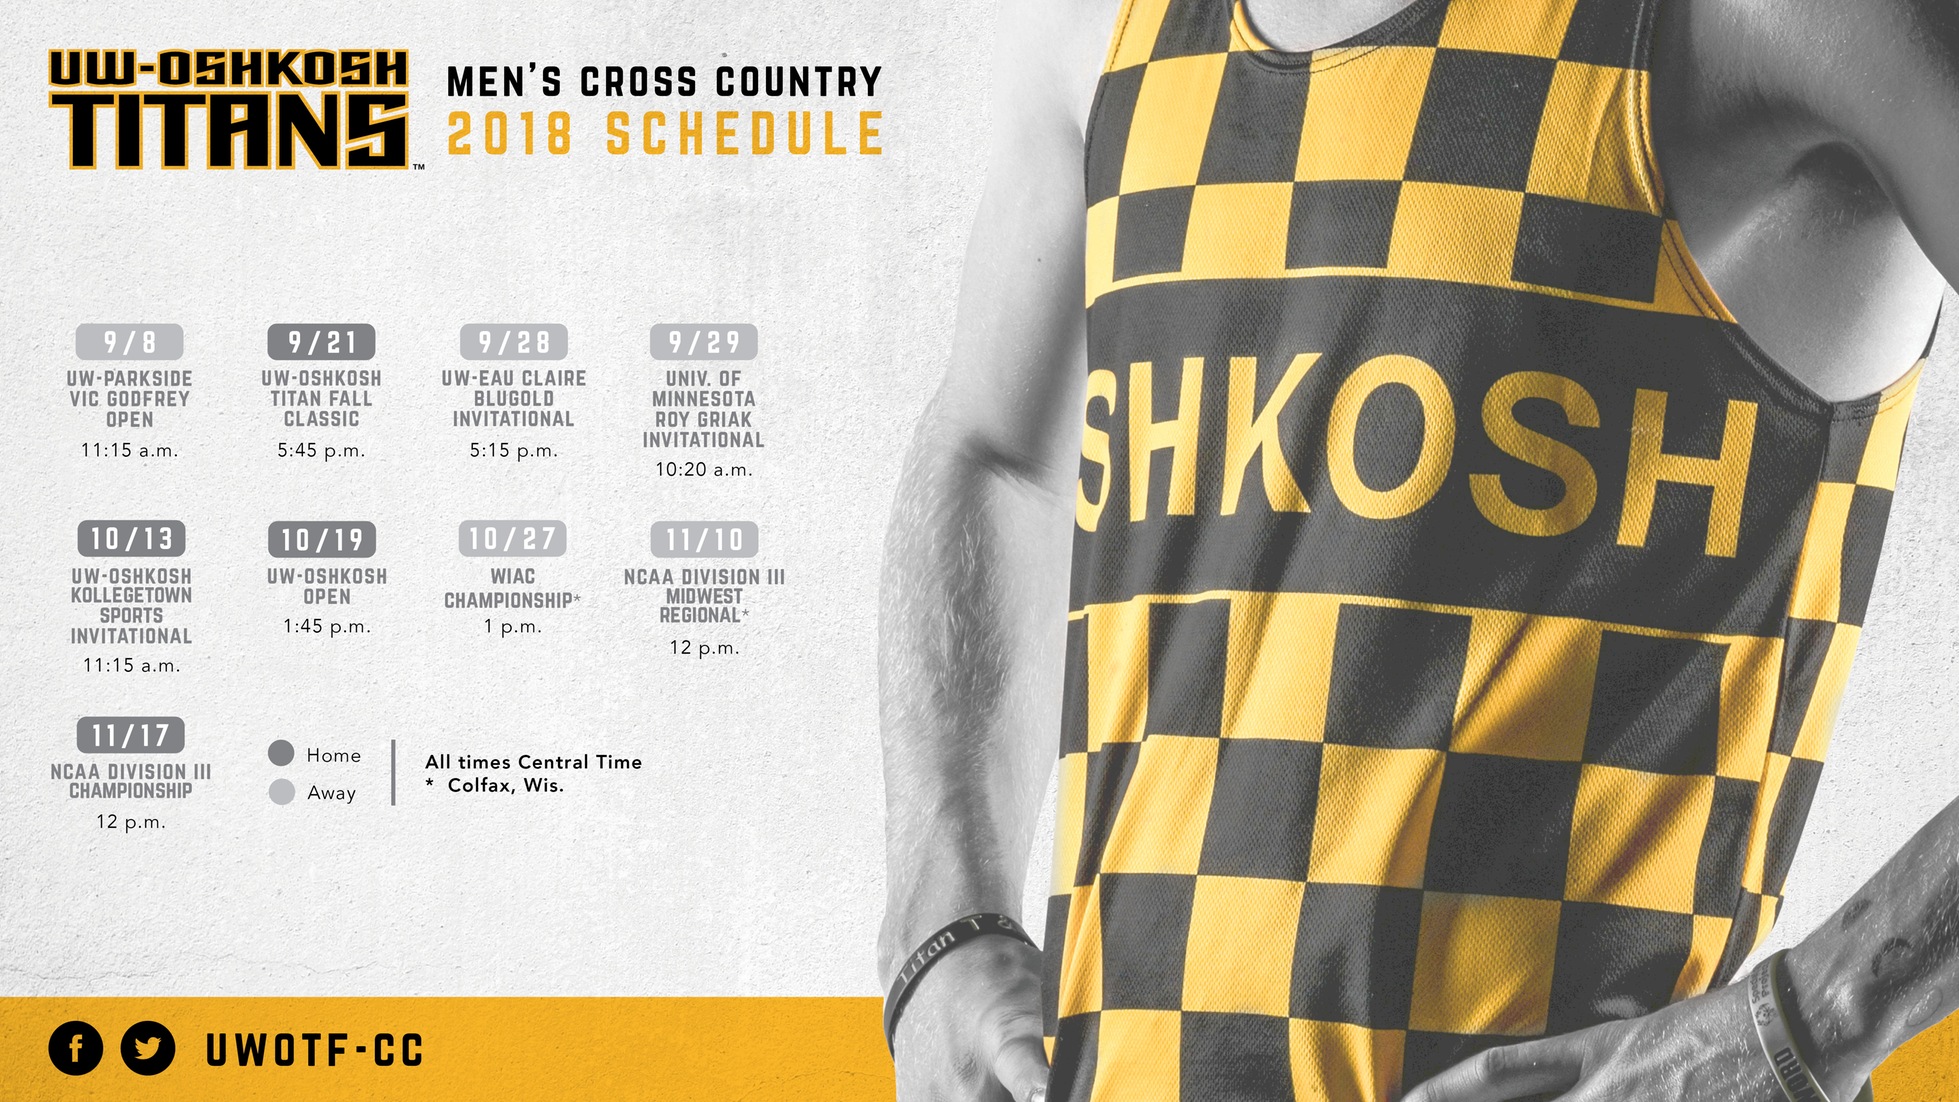 Titans’ Men’s Cross Country Schedule Includes The Hosting Of NCAA Championship